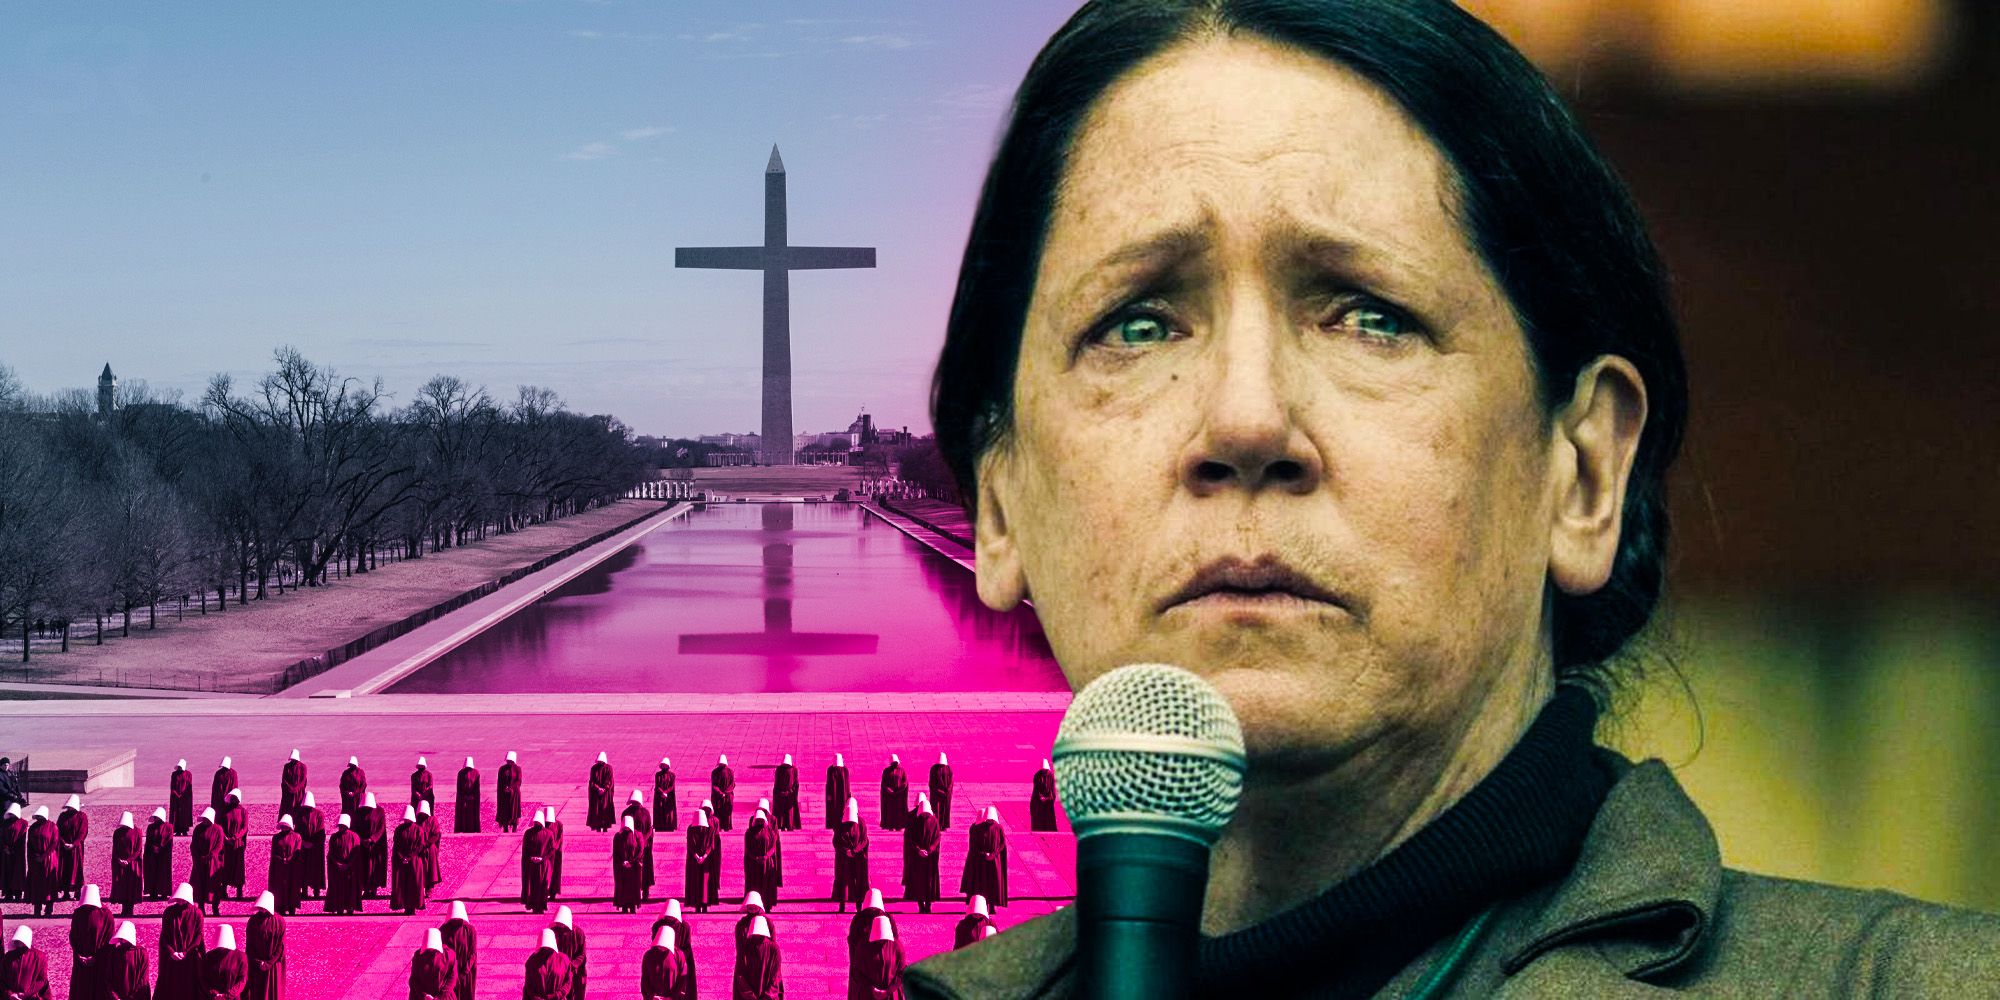 An image of Aunt Lydia looking upset and Handmaids standing in front of a cross